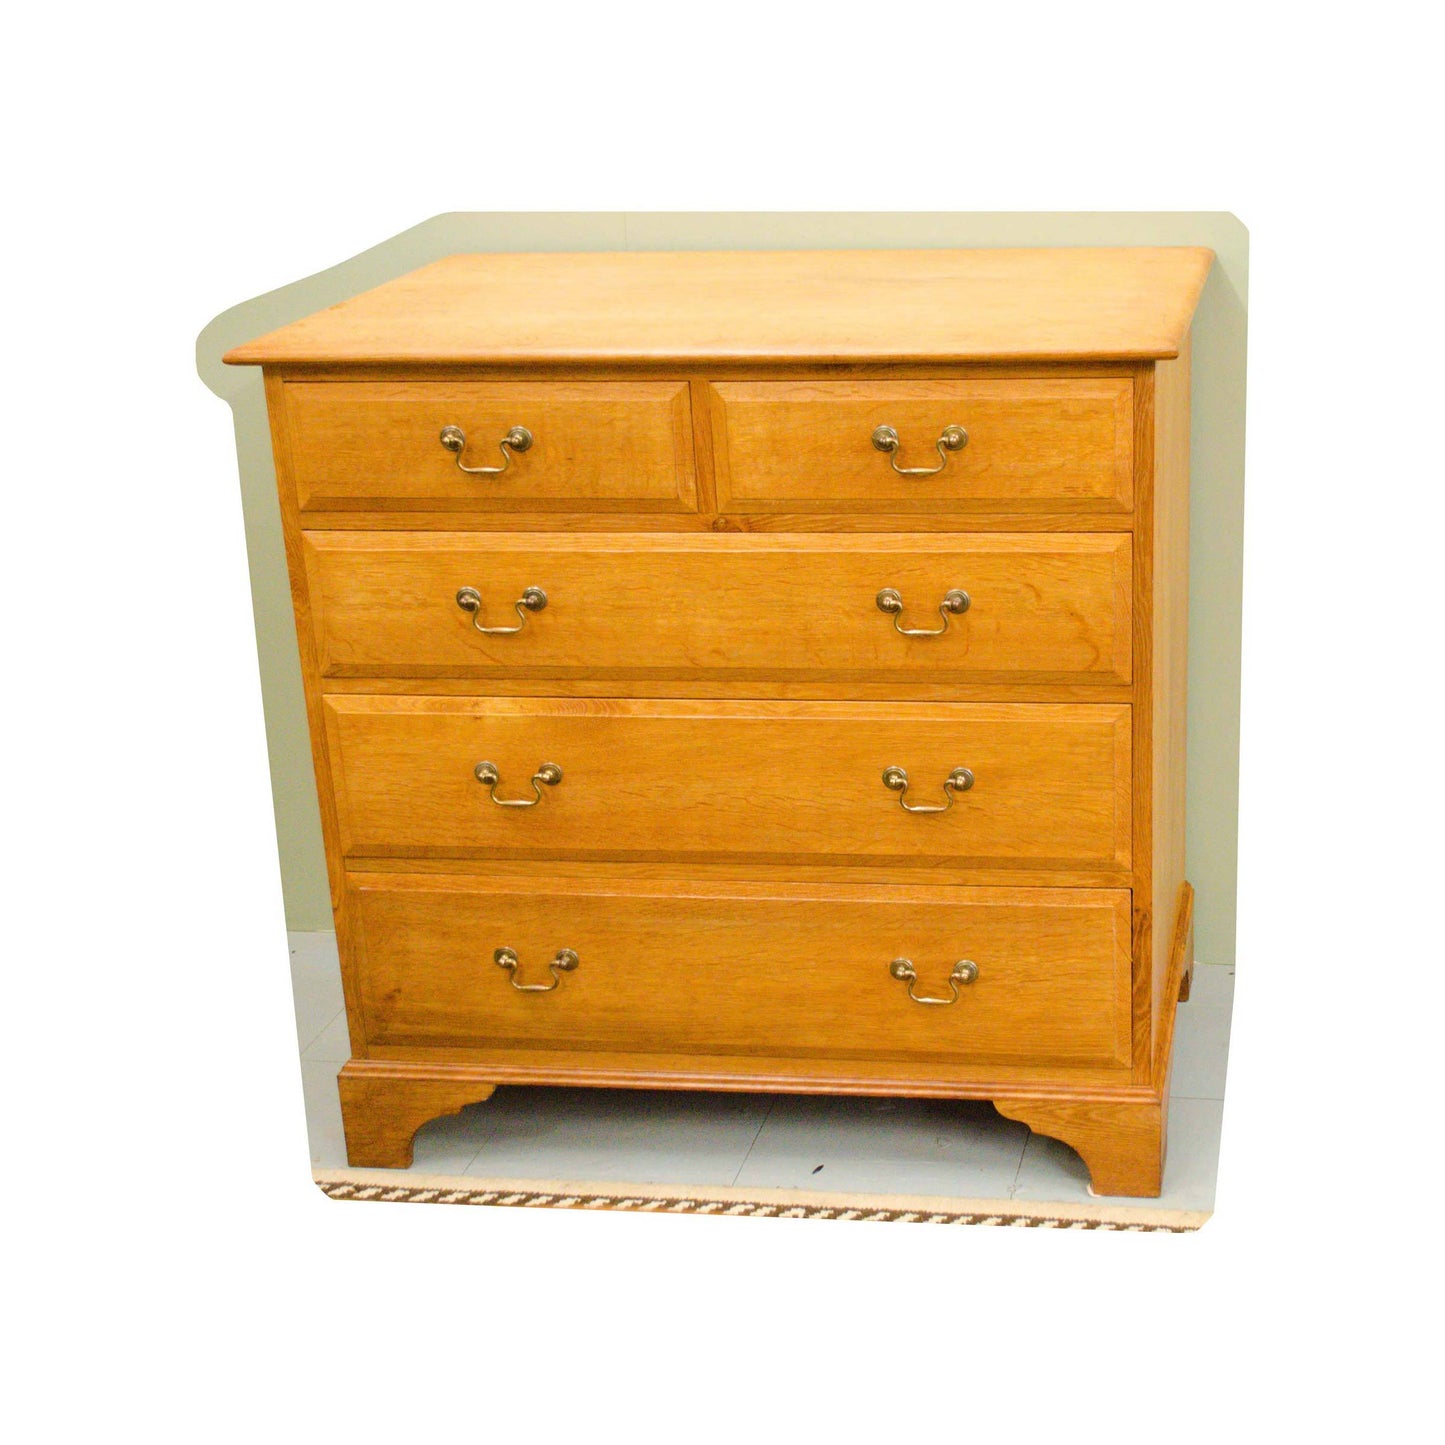 Peter Hall Peter Hall Light Oak Arts and Crafts Chest of Drawers